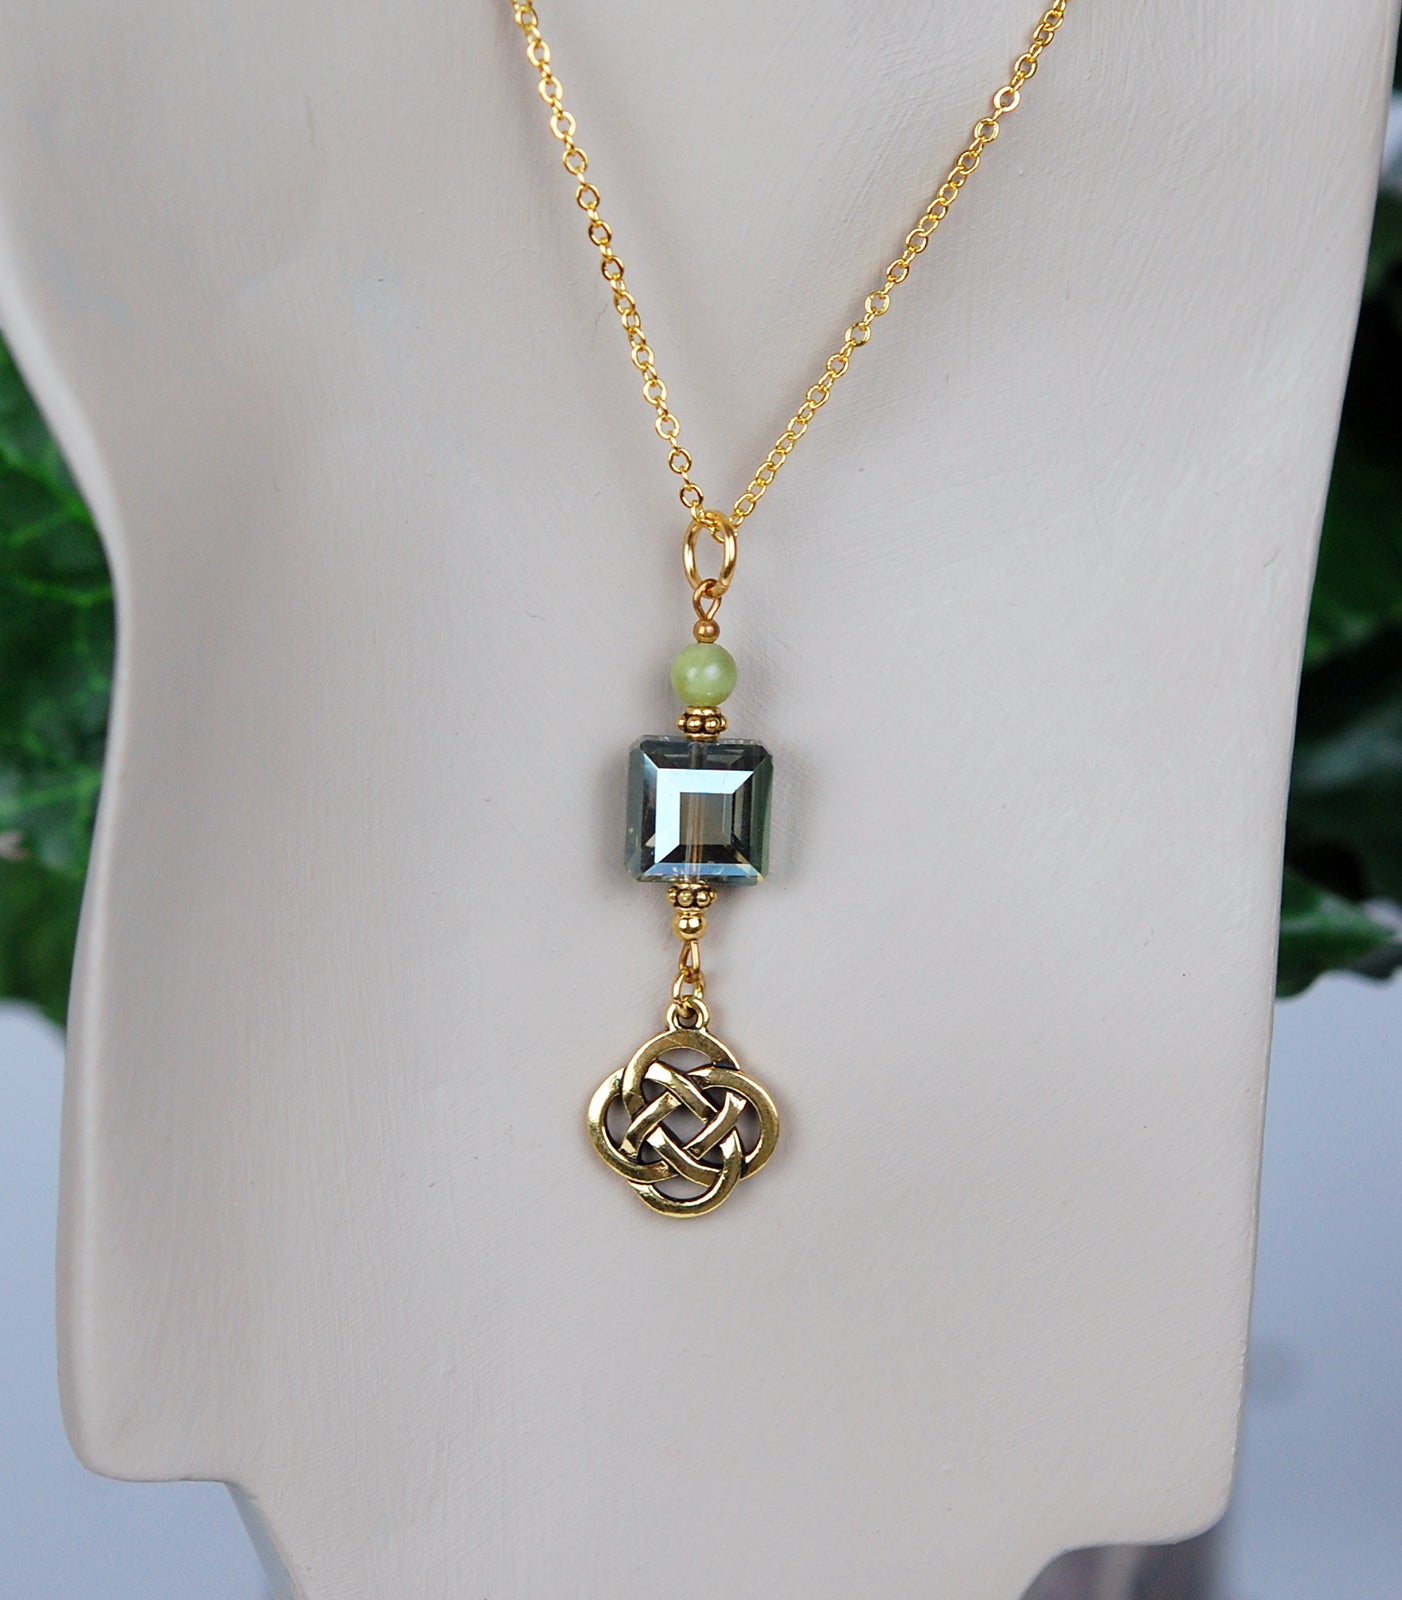 Connemara Marble and Square Crystal Pendant